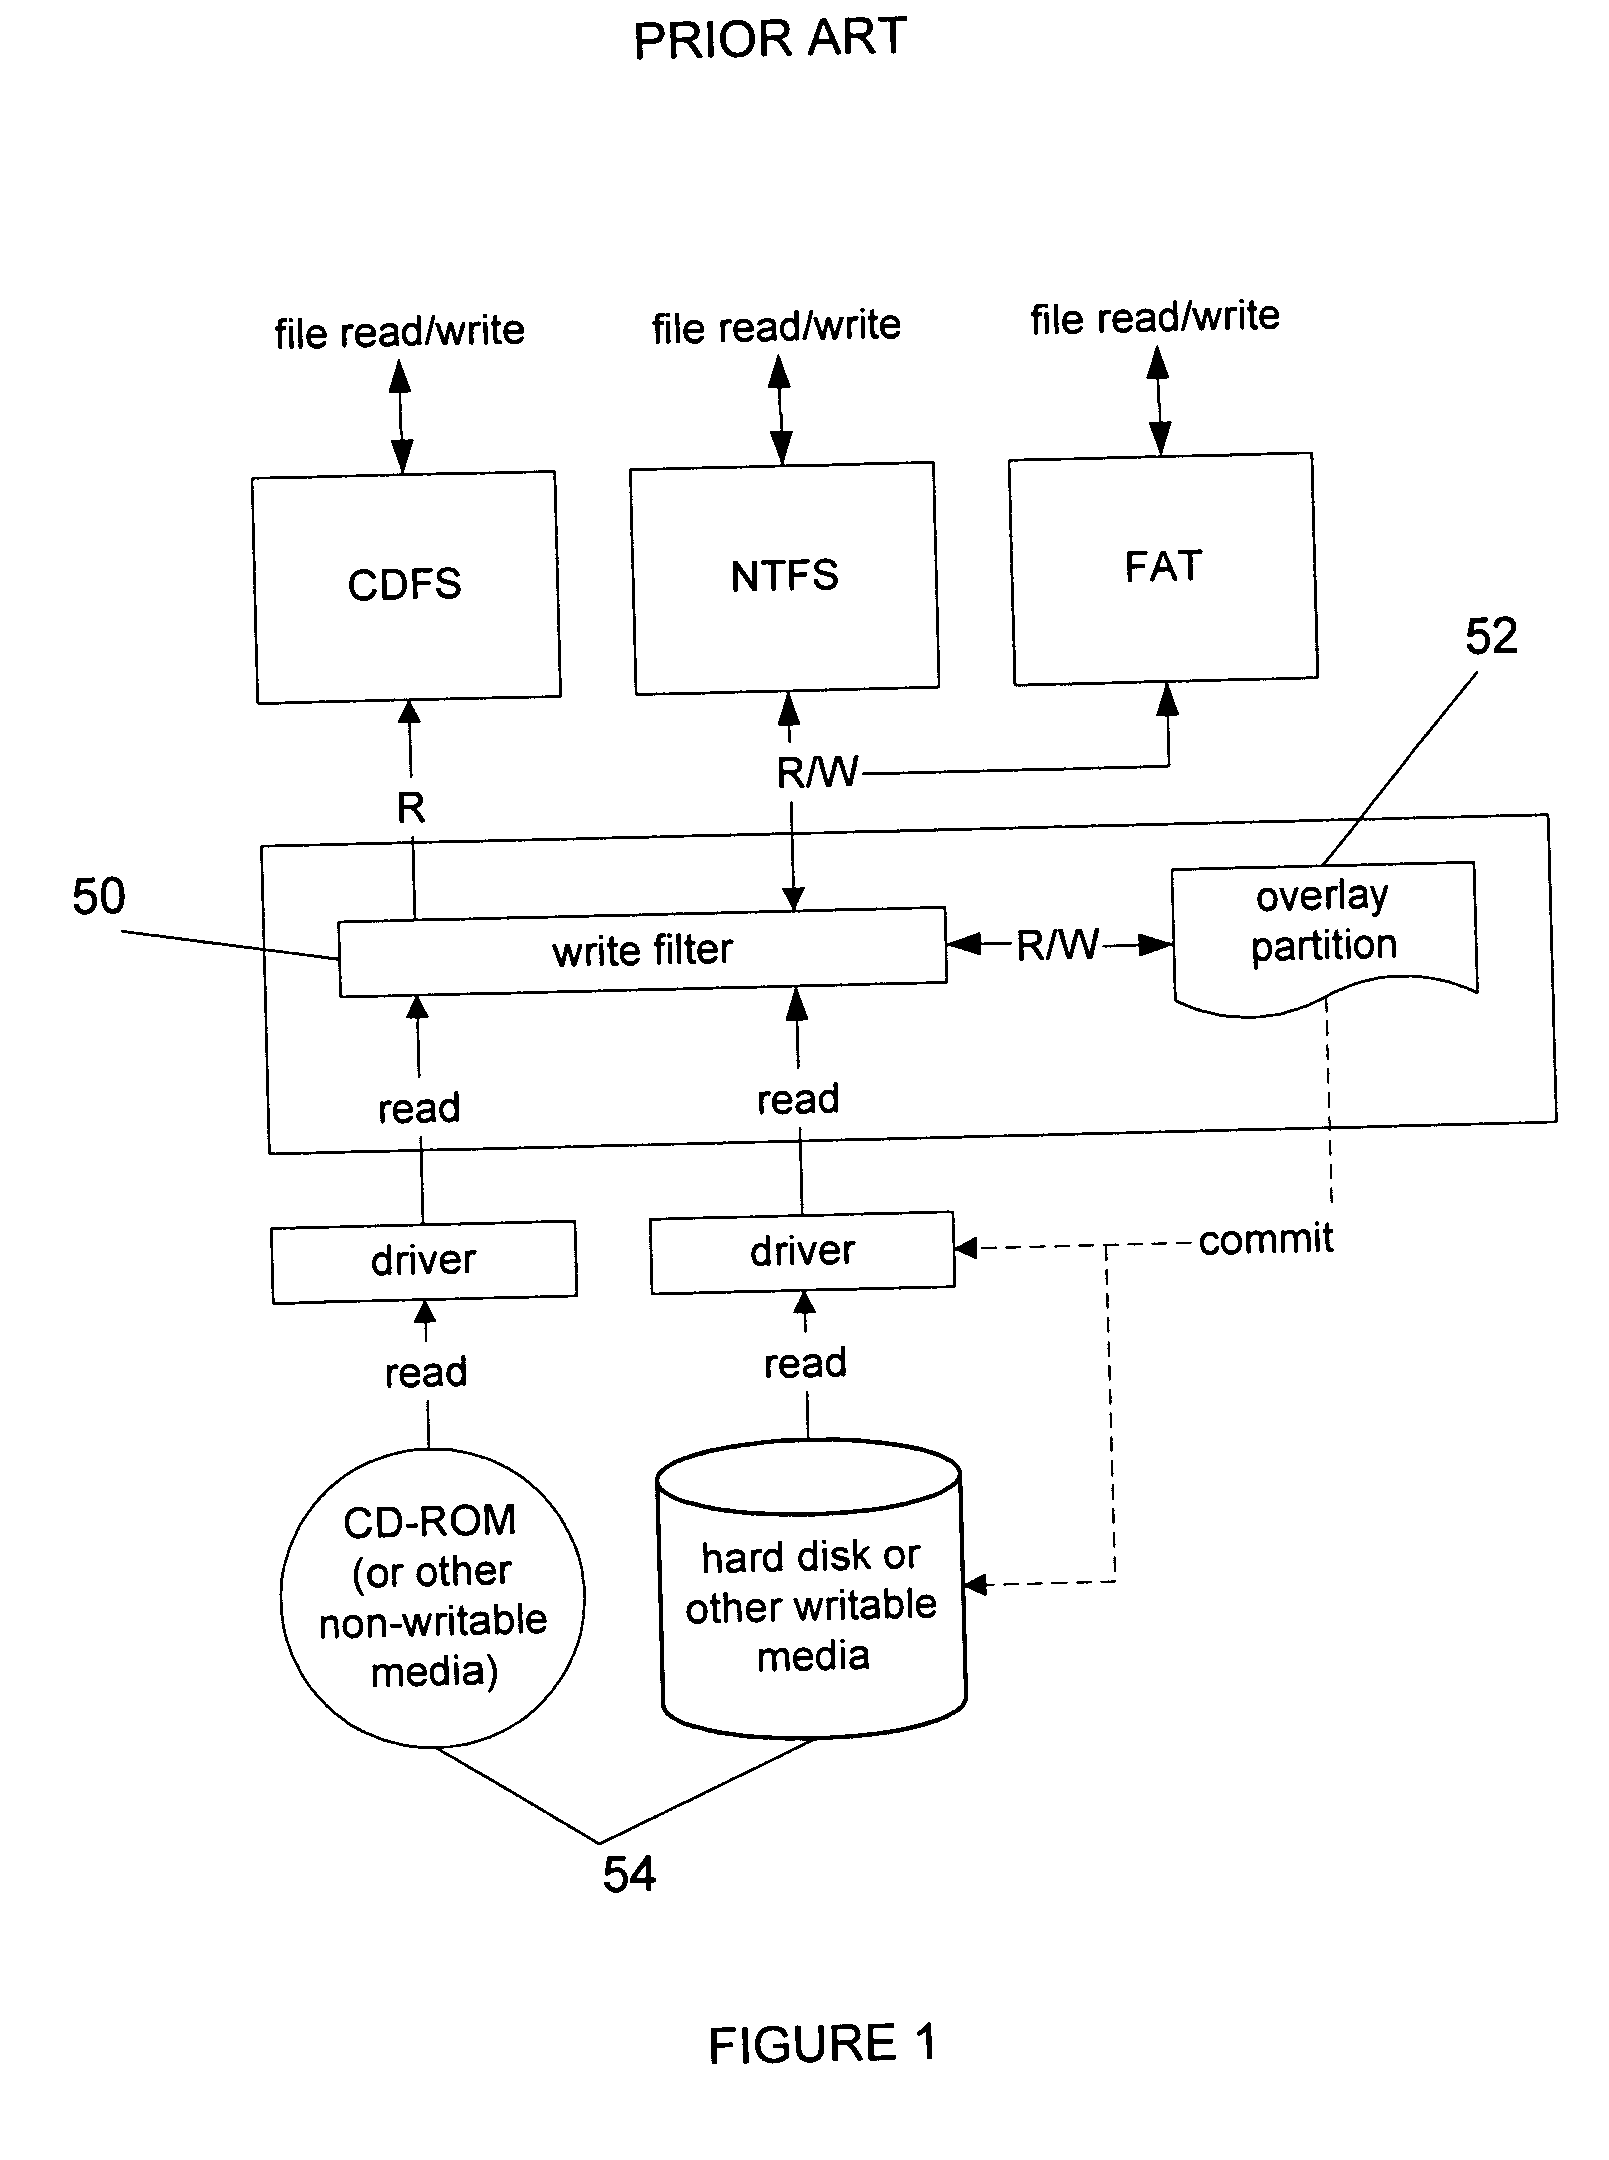 Efficient replication of embedded operating system with a write filter and overlay partition